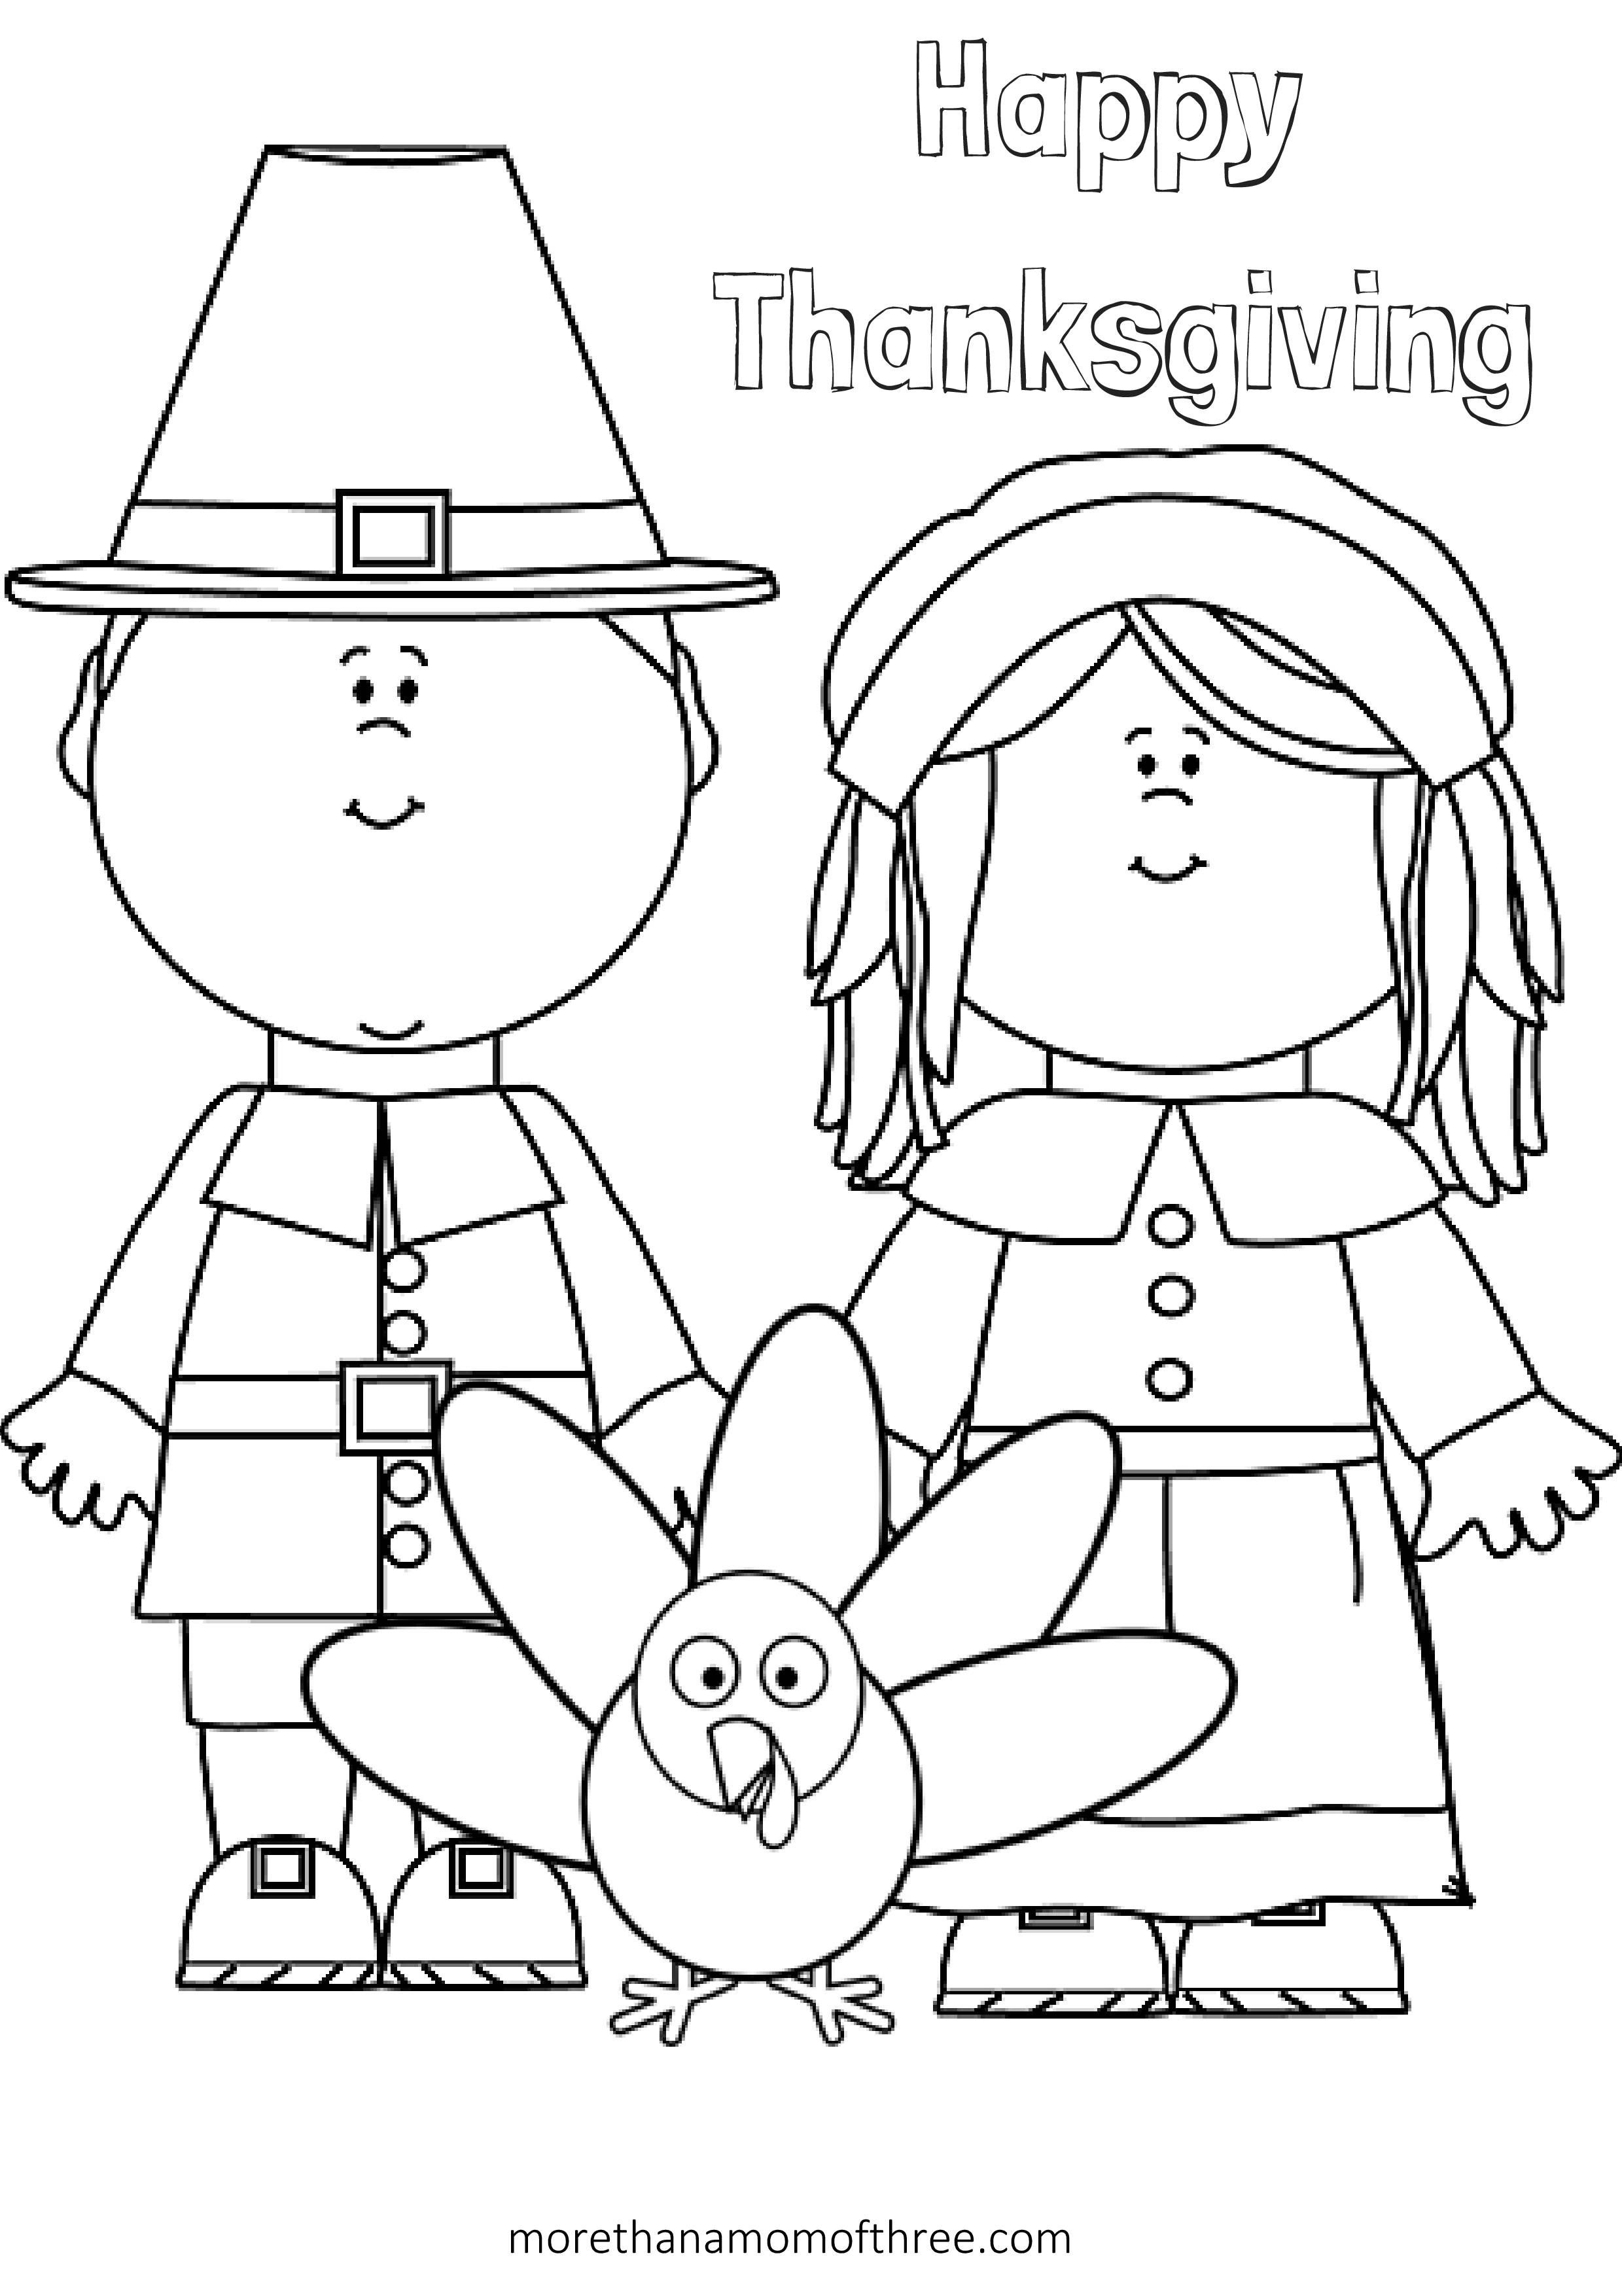 Free Thanksgiving Coloring Pages Printables For Kids | Thanksgiving - Thanksgiving Printable Books Free